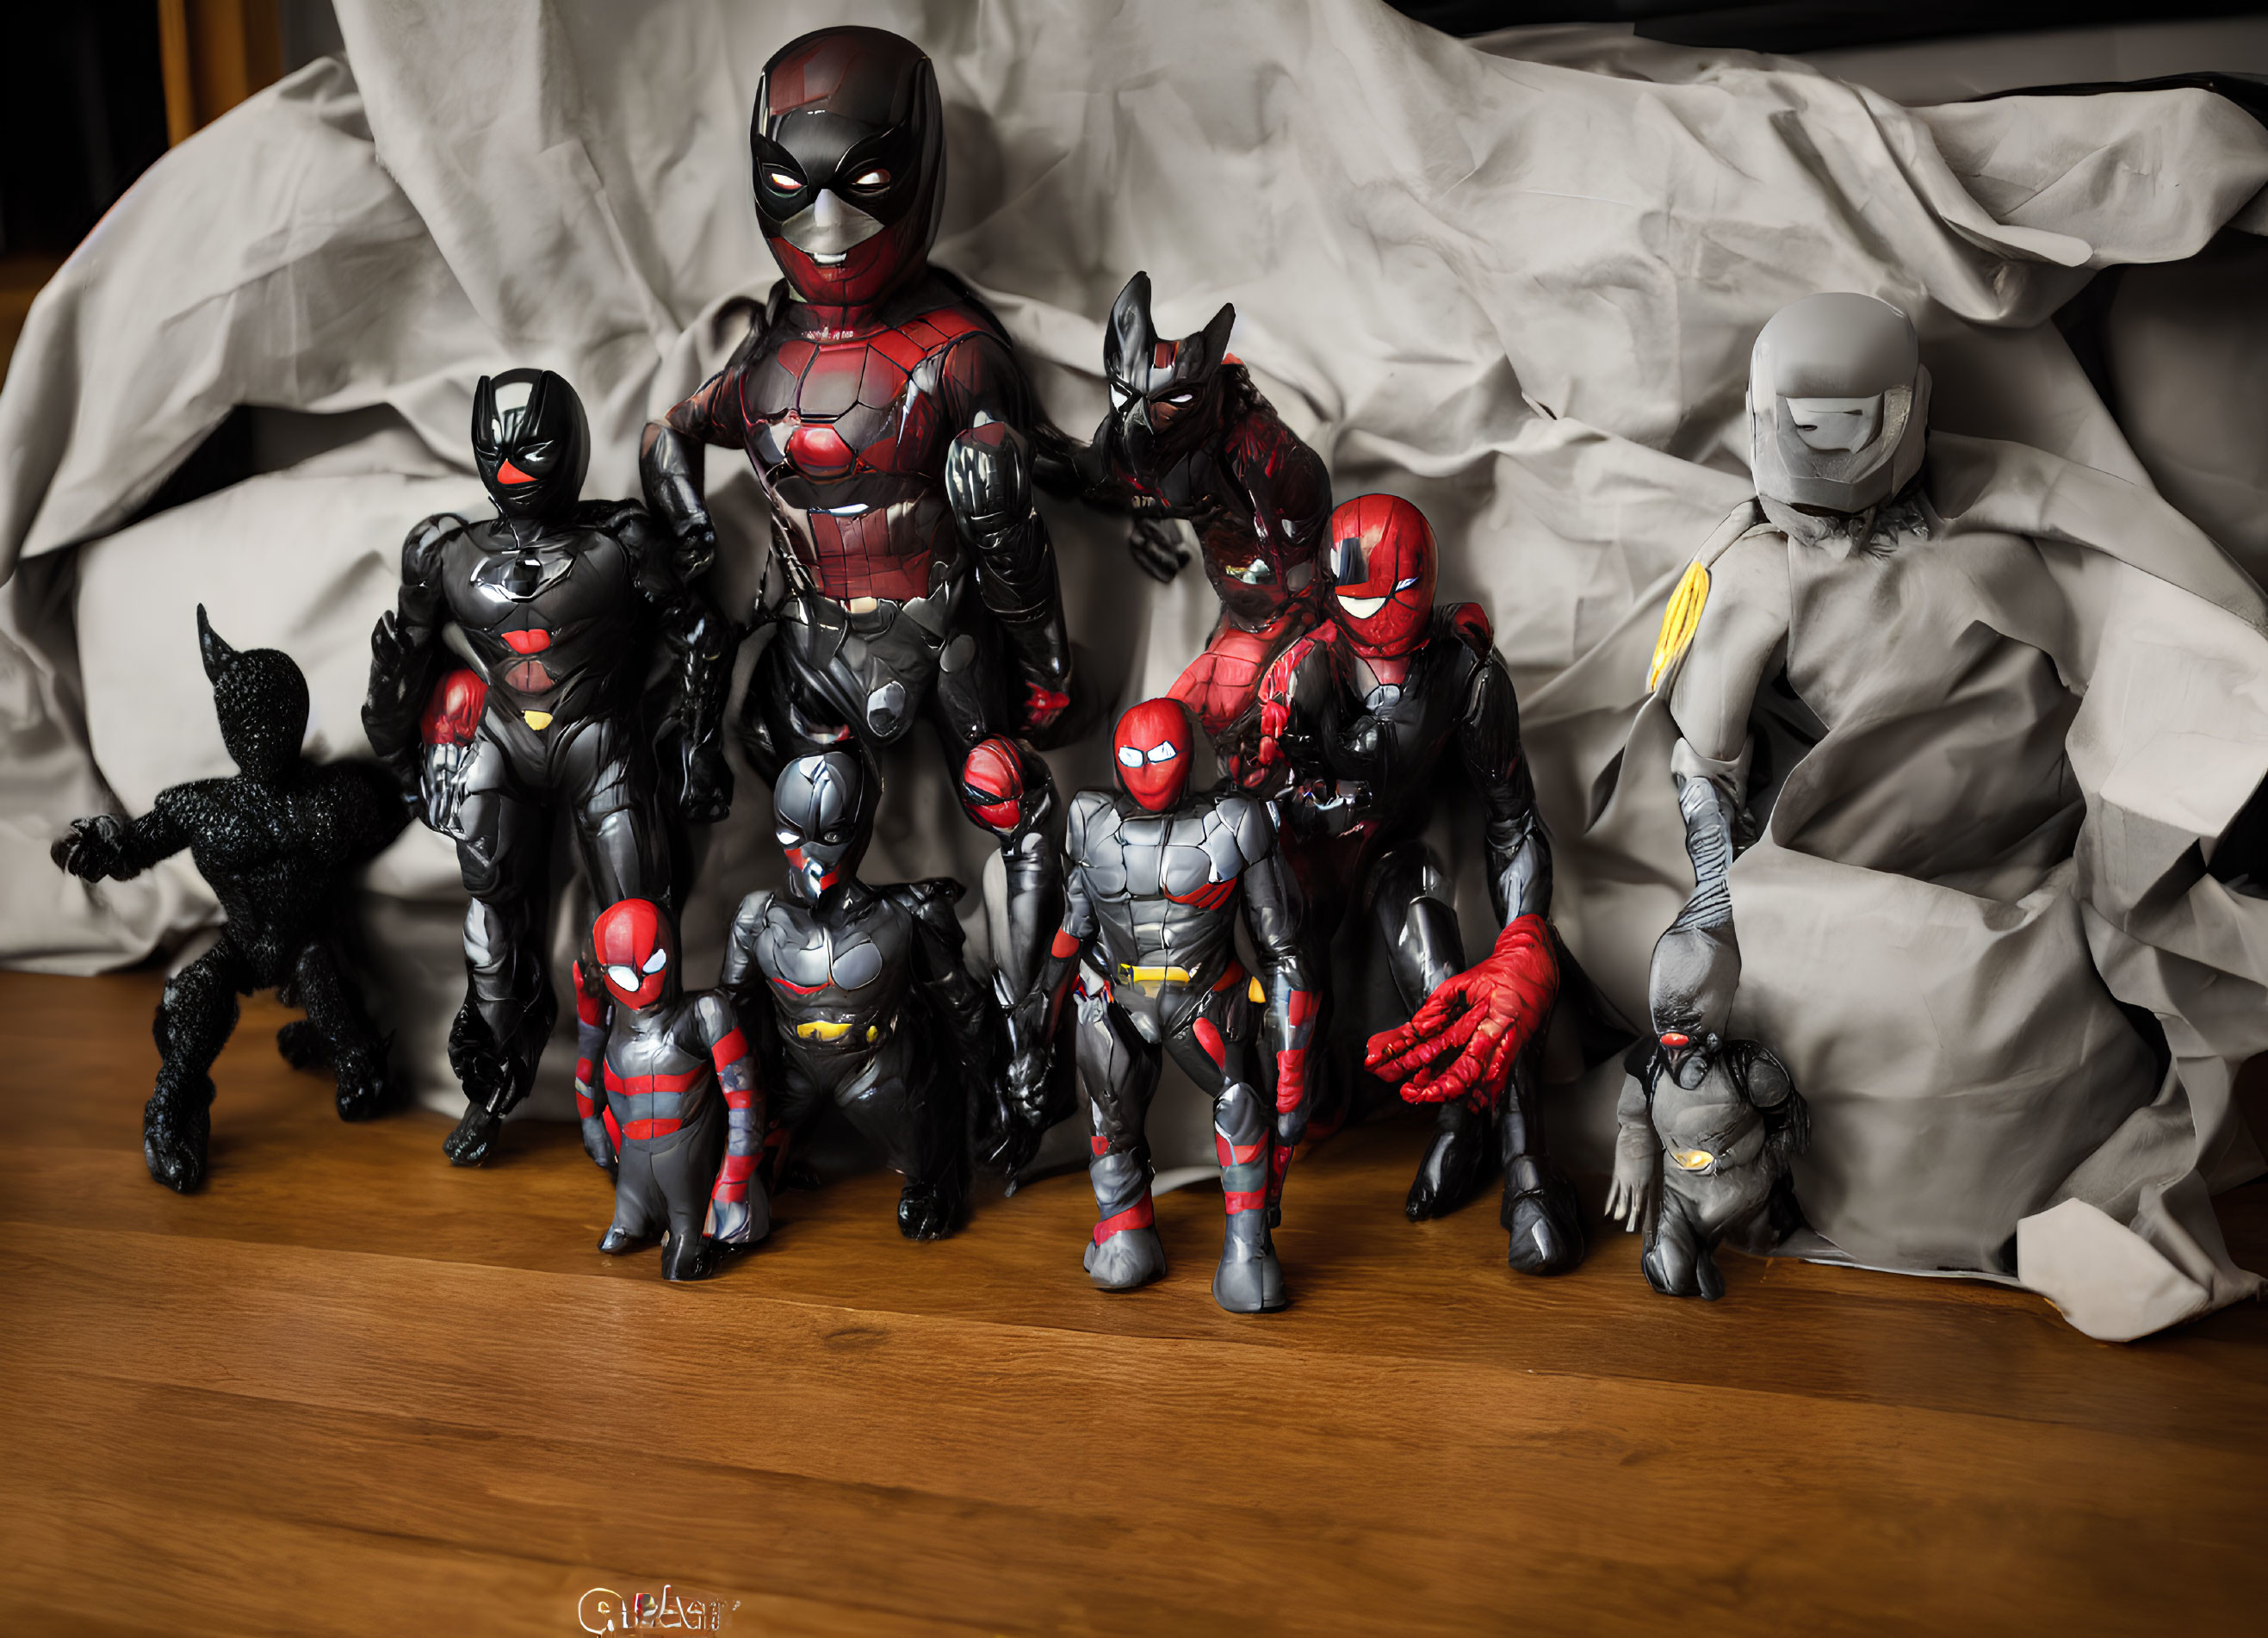 Assorted Deadpool Figures and Toys on Wooden Floor